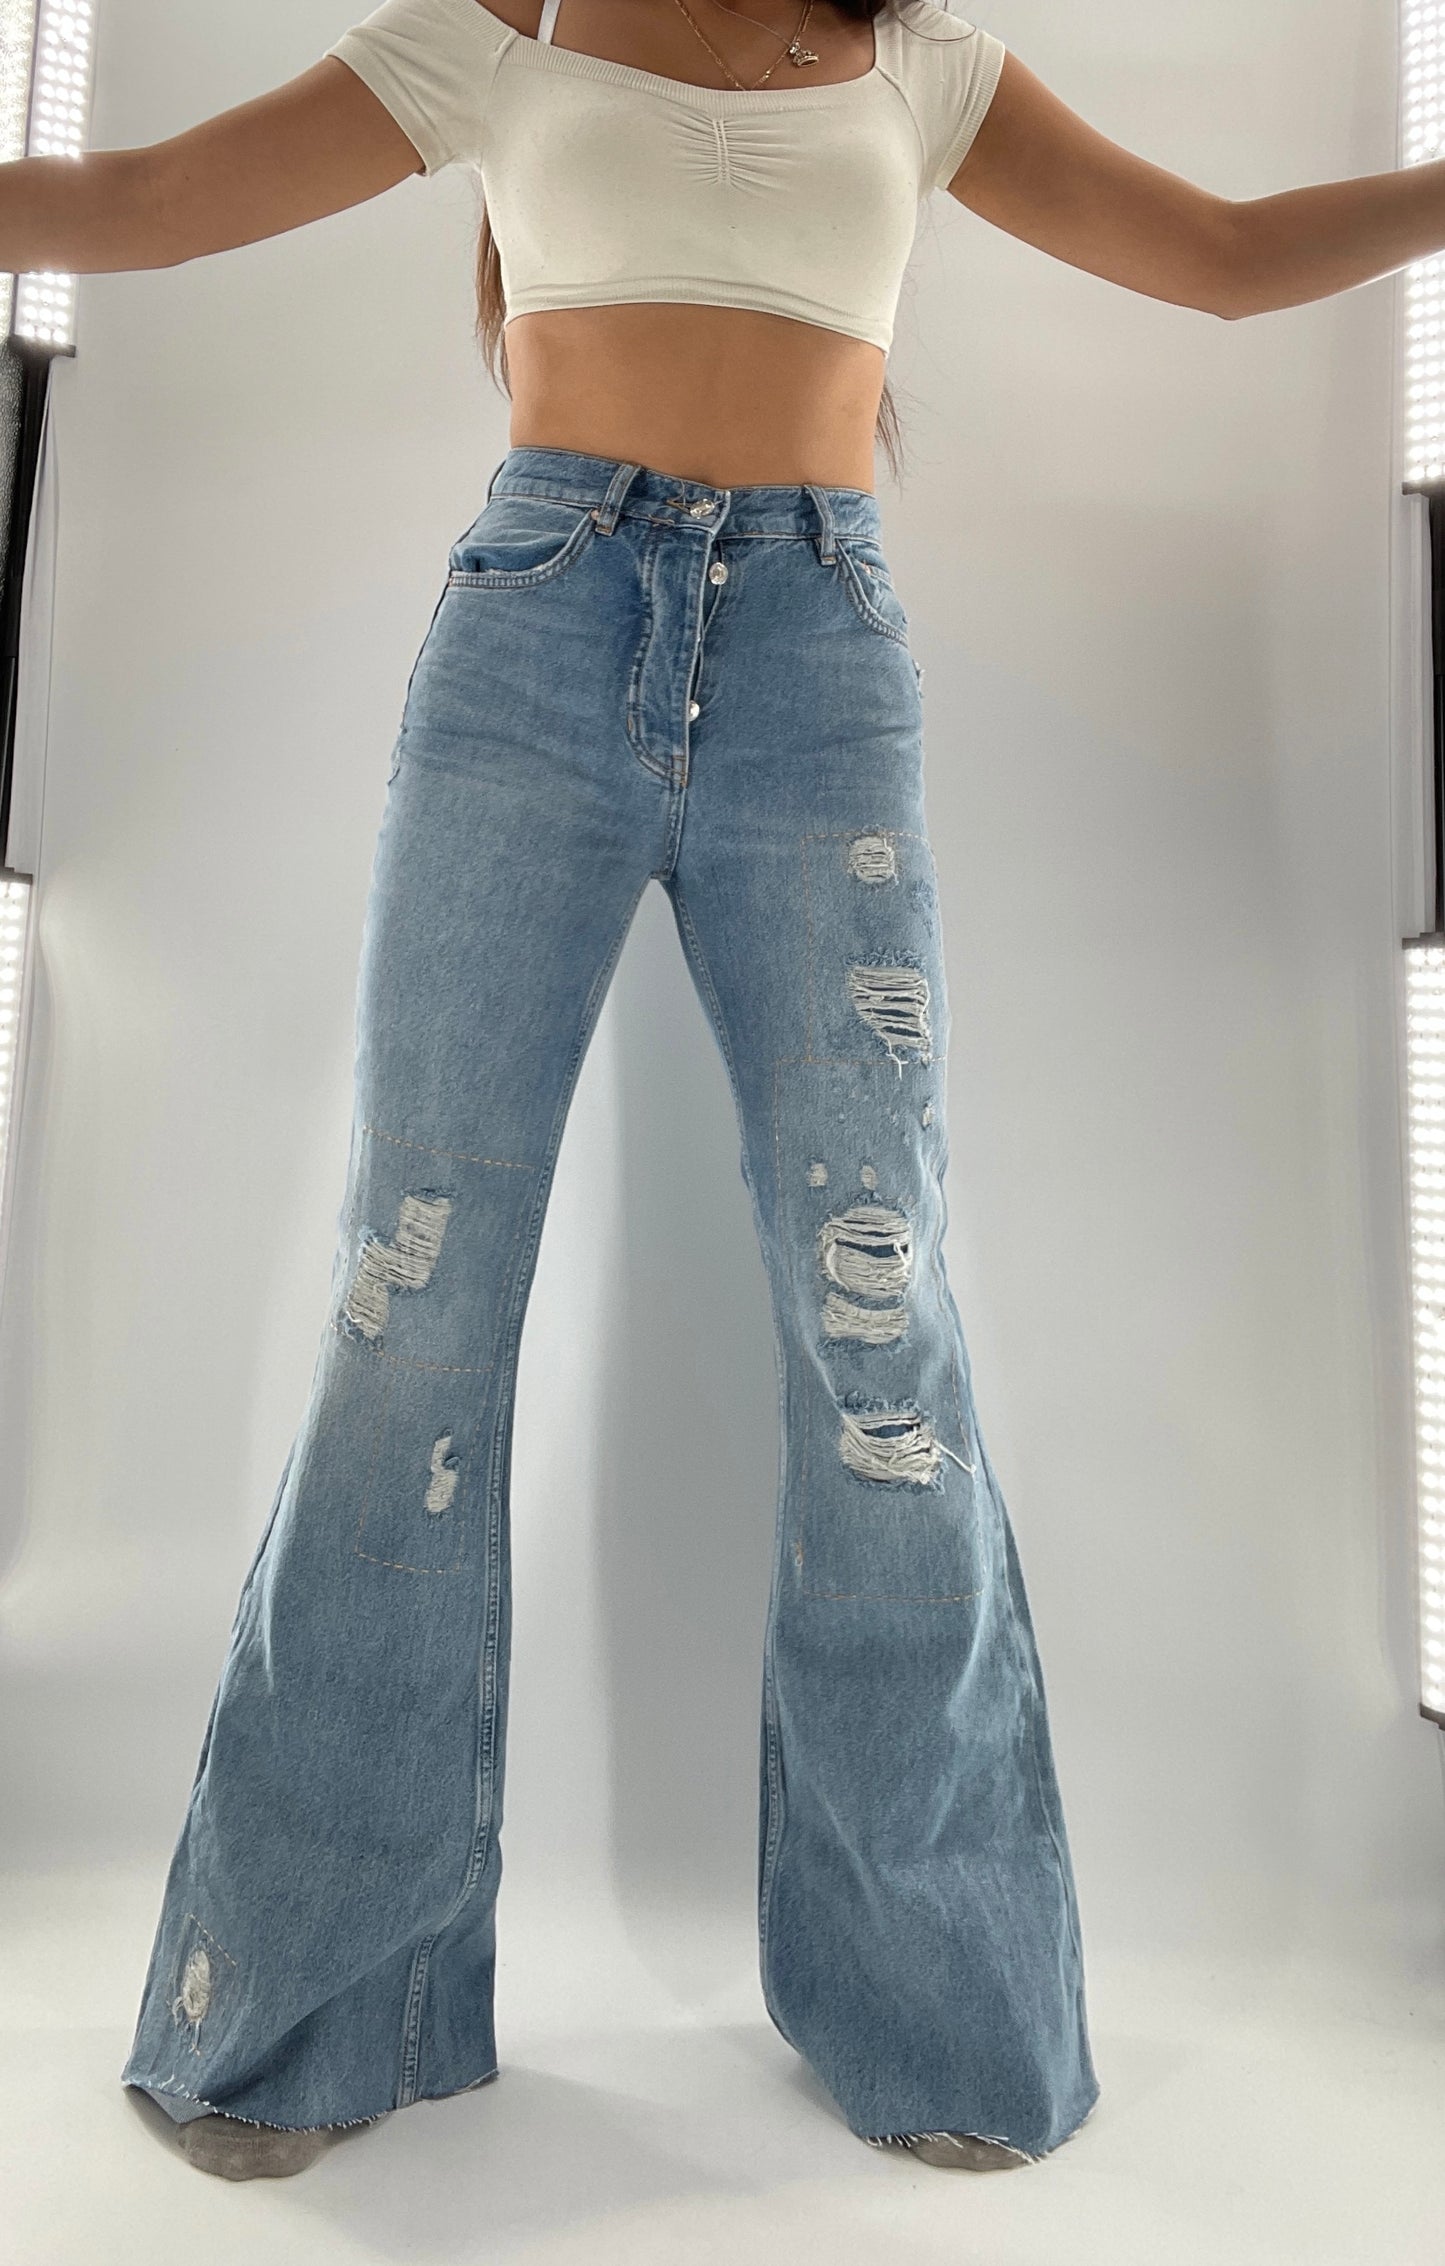 Free People Light Wash Jeans with Embroidery, Stitching, and Distressing (26)